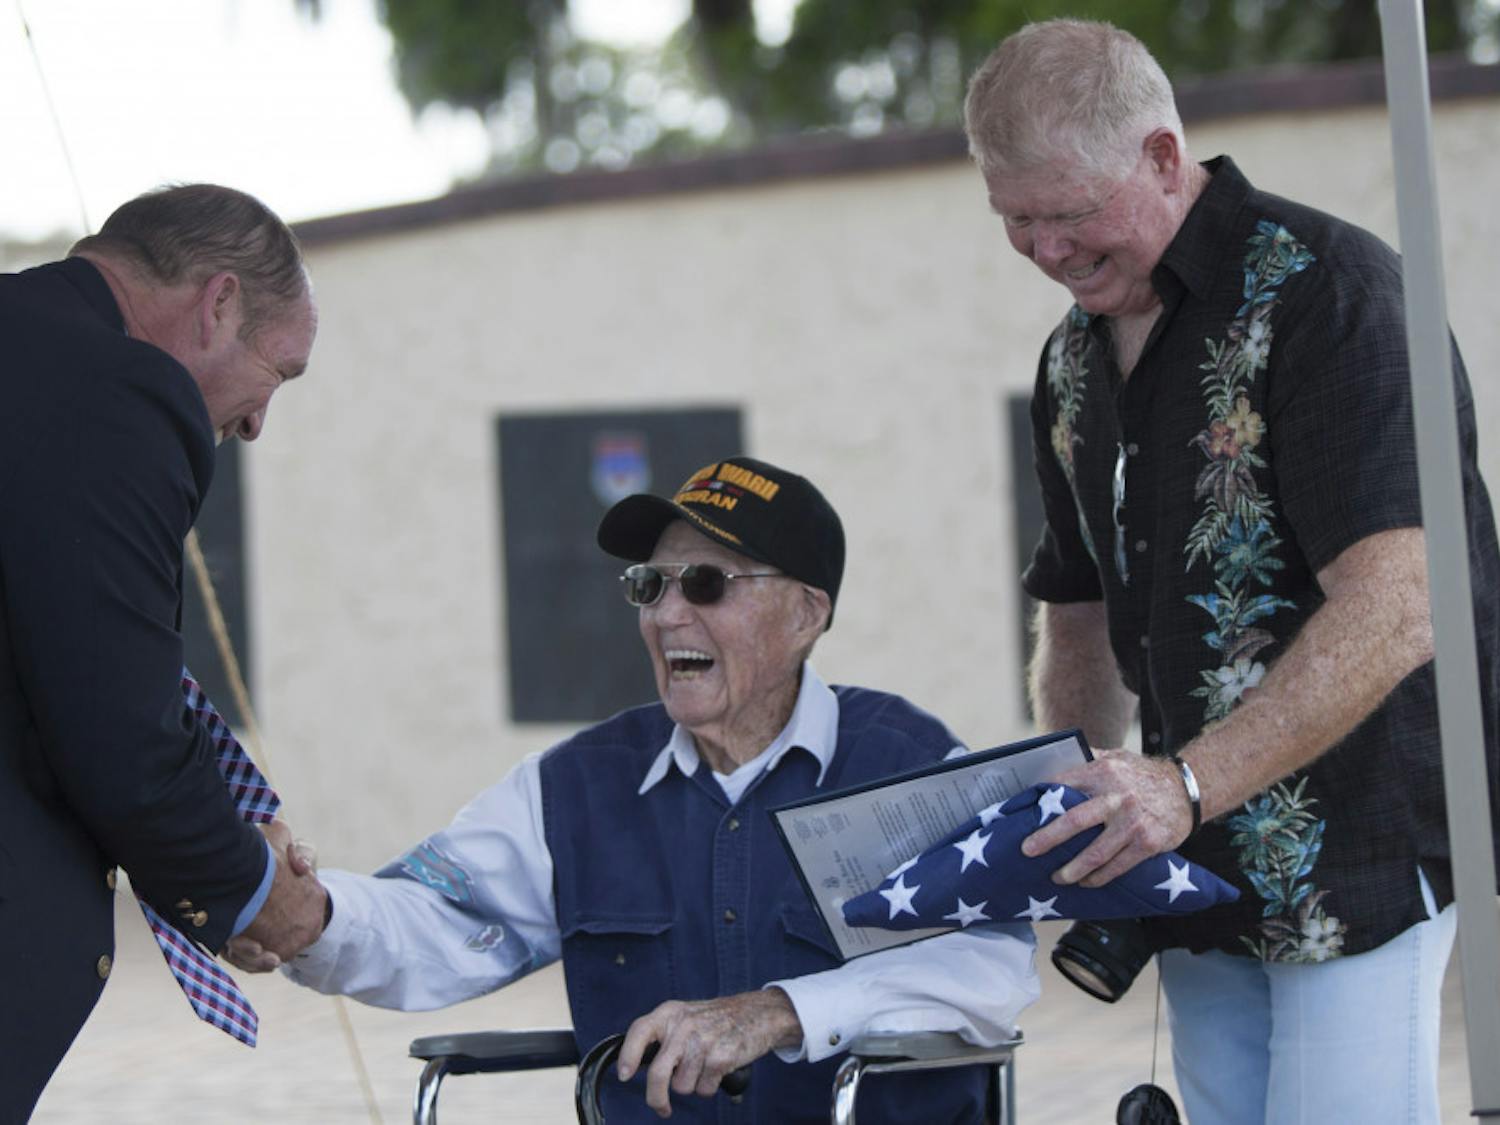 Charles D. Moloney, a 95-year-old World War II veteran, shakes the hand of Rep. Ted Yoho during a ceremony honoring Moloney's service during WWII at Camp Blanding Joint Training Center on Friday. Moloney enlisted in the U.S. Army on April 4,1942, and received six medals on Friday that he hadn't received after leaving the U.S. Army.